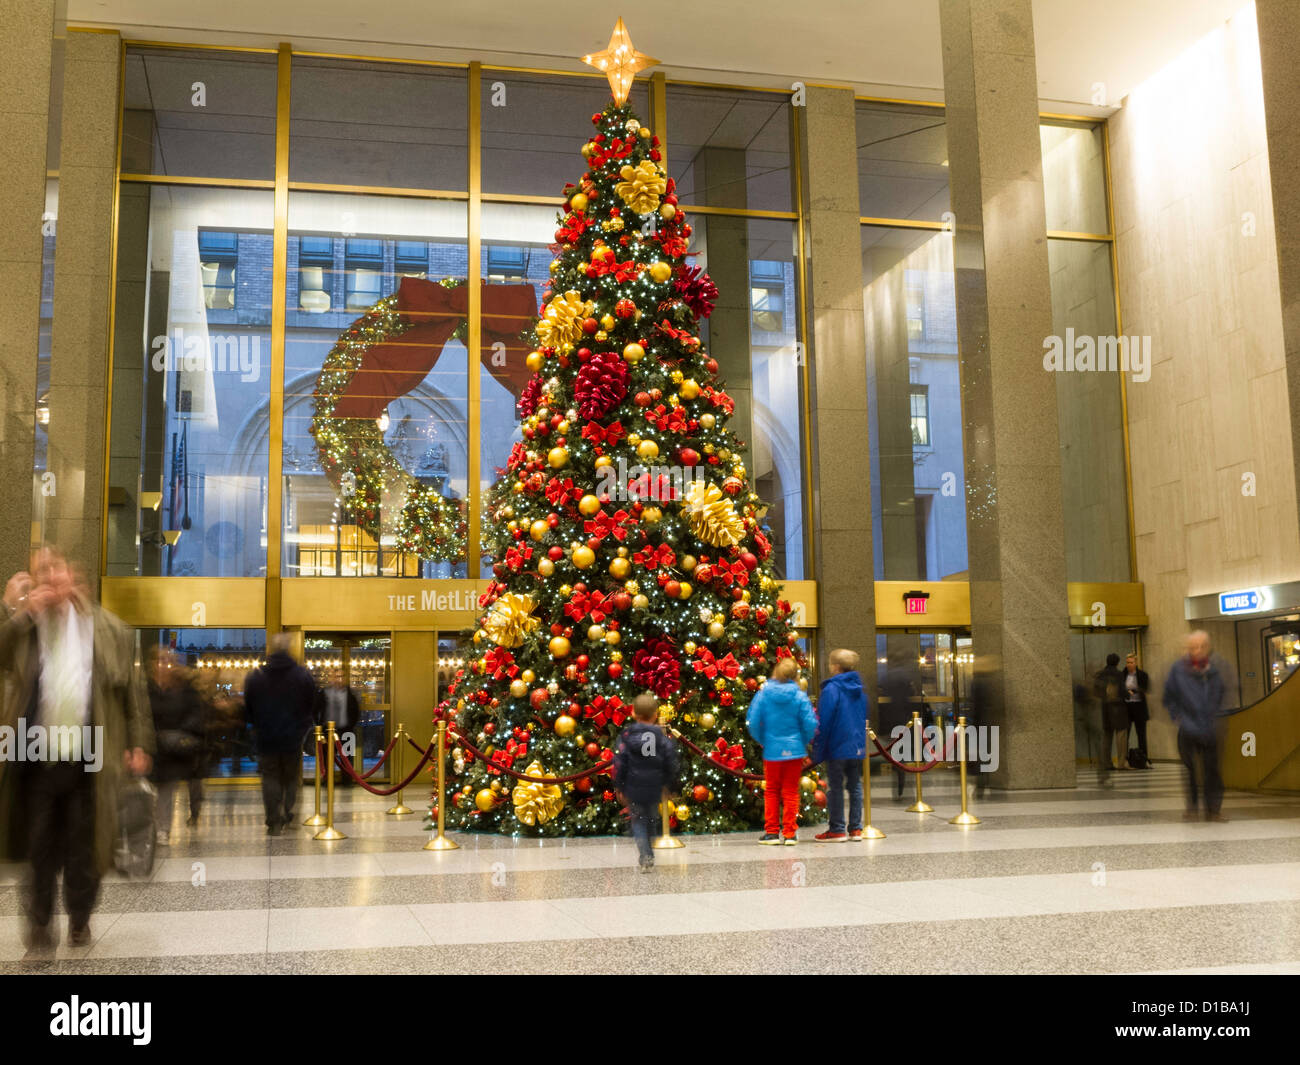 tree hi-res stock met Alamy - Christmas photography the and images